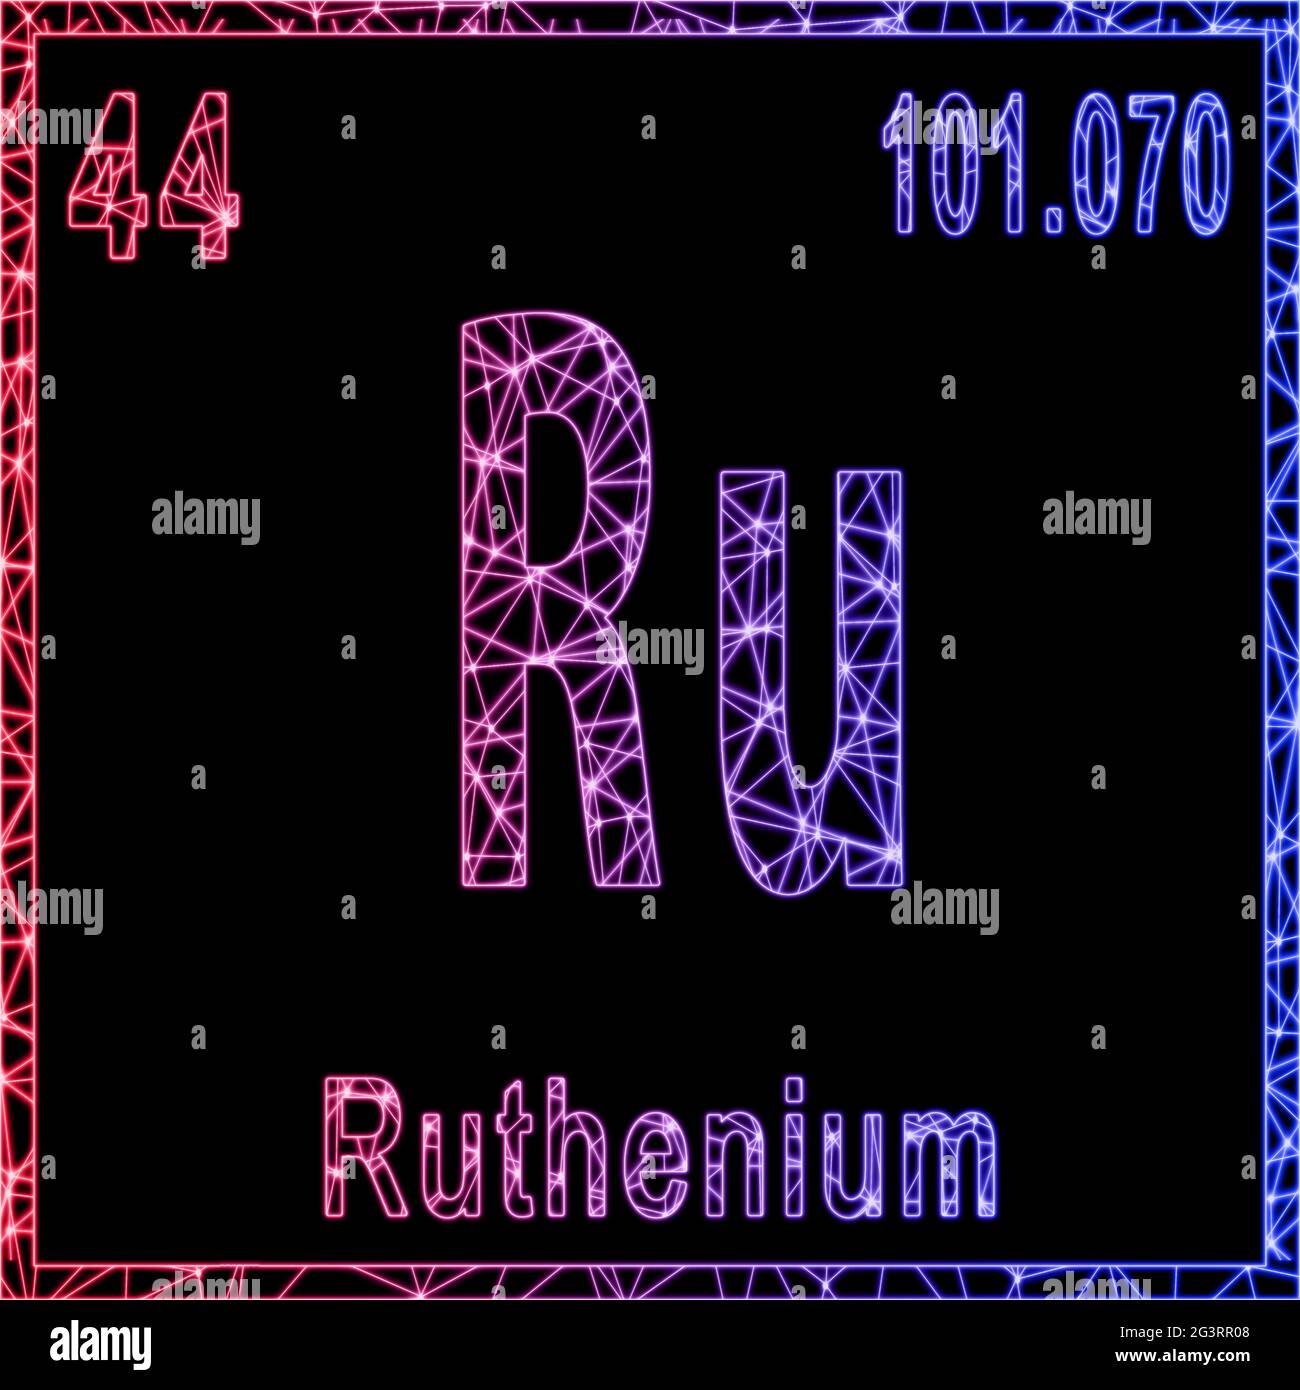 Ruthenium chemical element, Sign with atomic number and atomic weight, Stock Photo